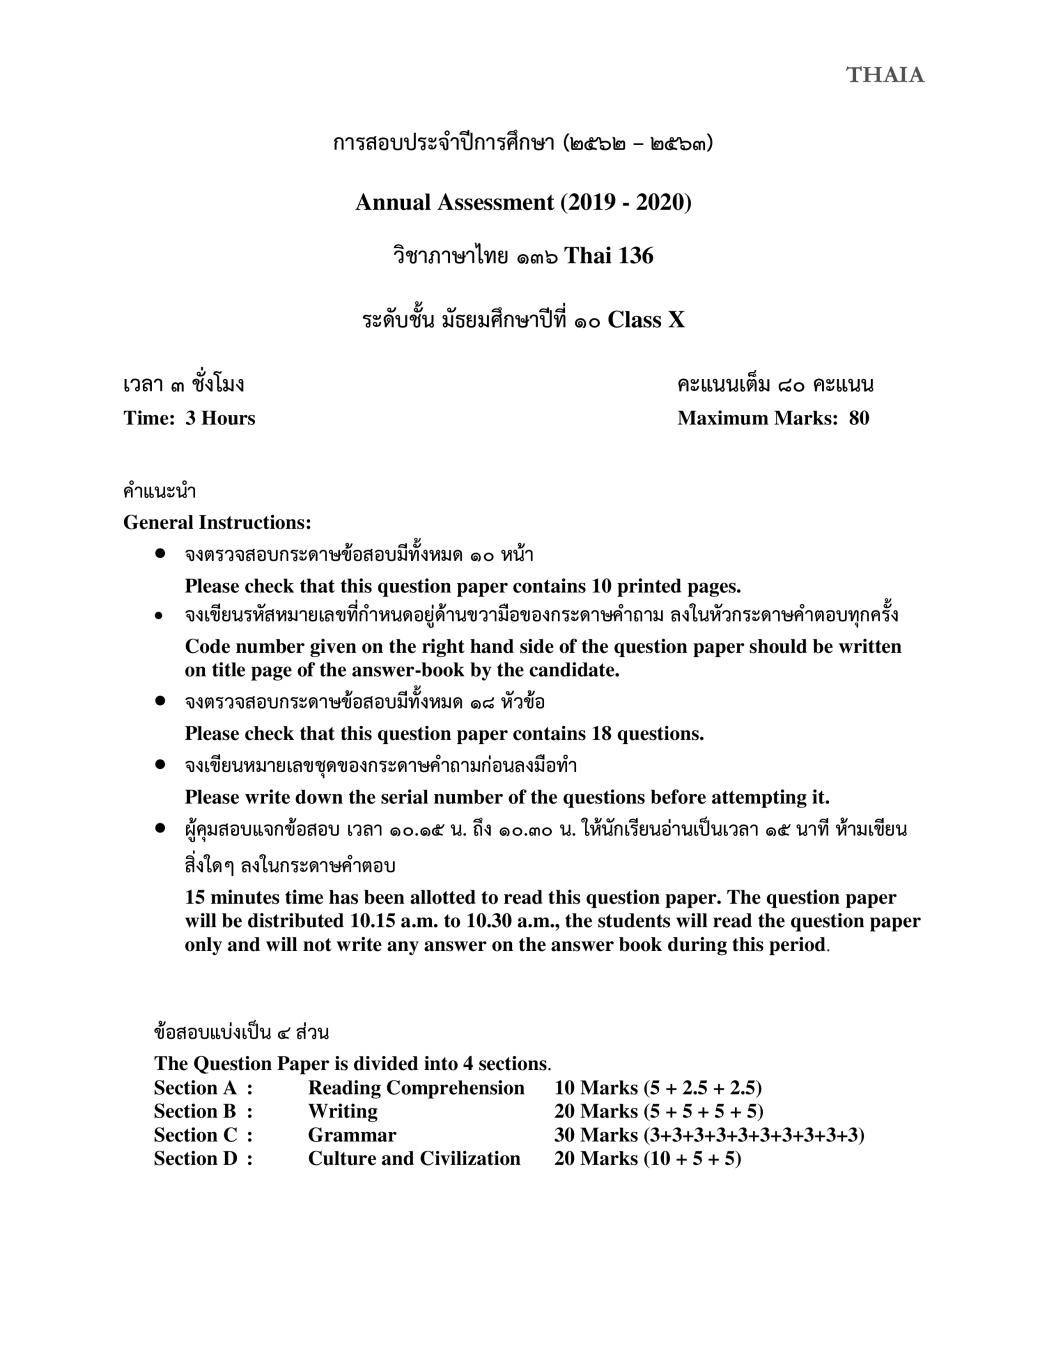 CBSE Class 10 Sample Paper 2020 for Thai - Page 1